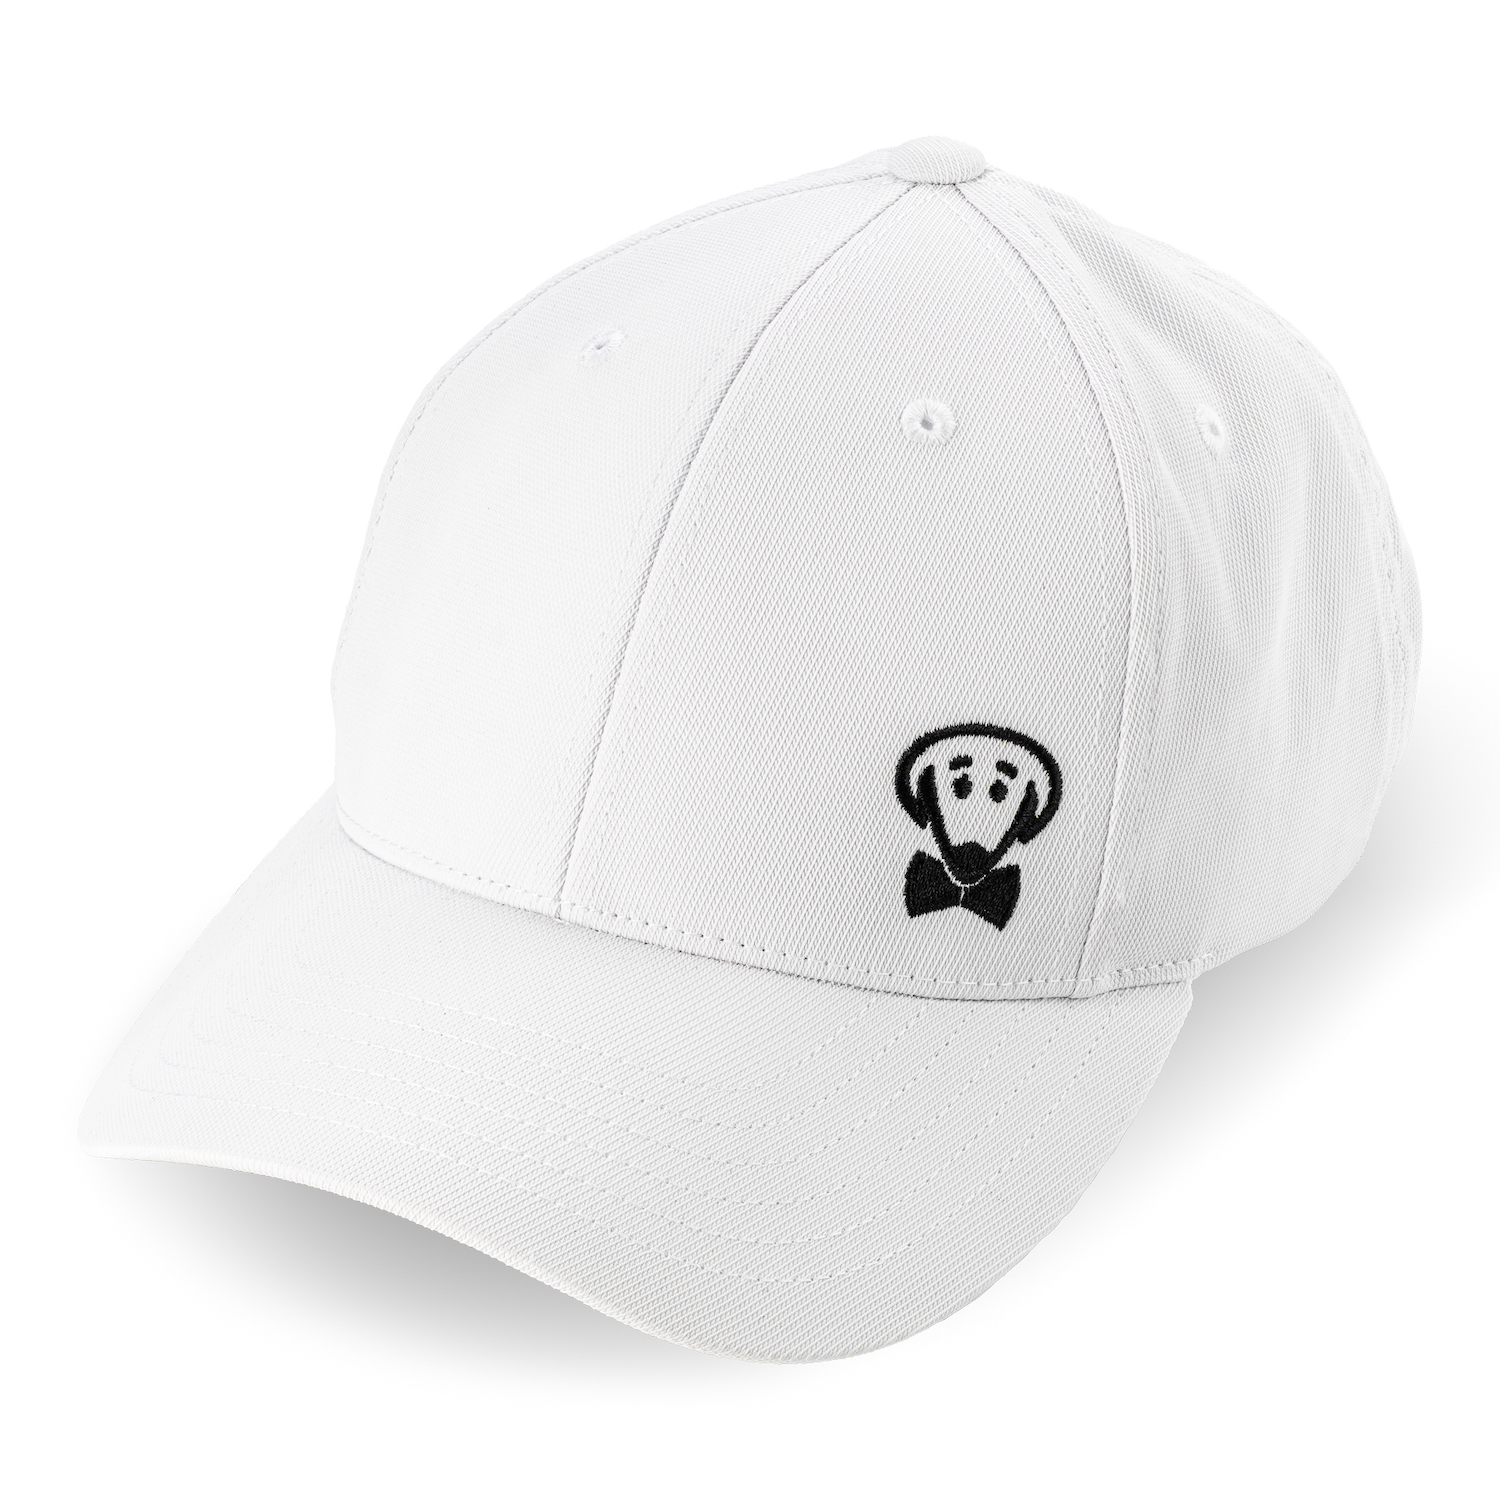 Beau Tyler - Ronnie baseball hat white front